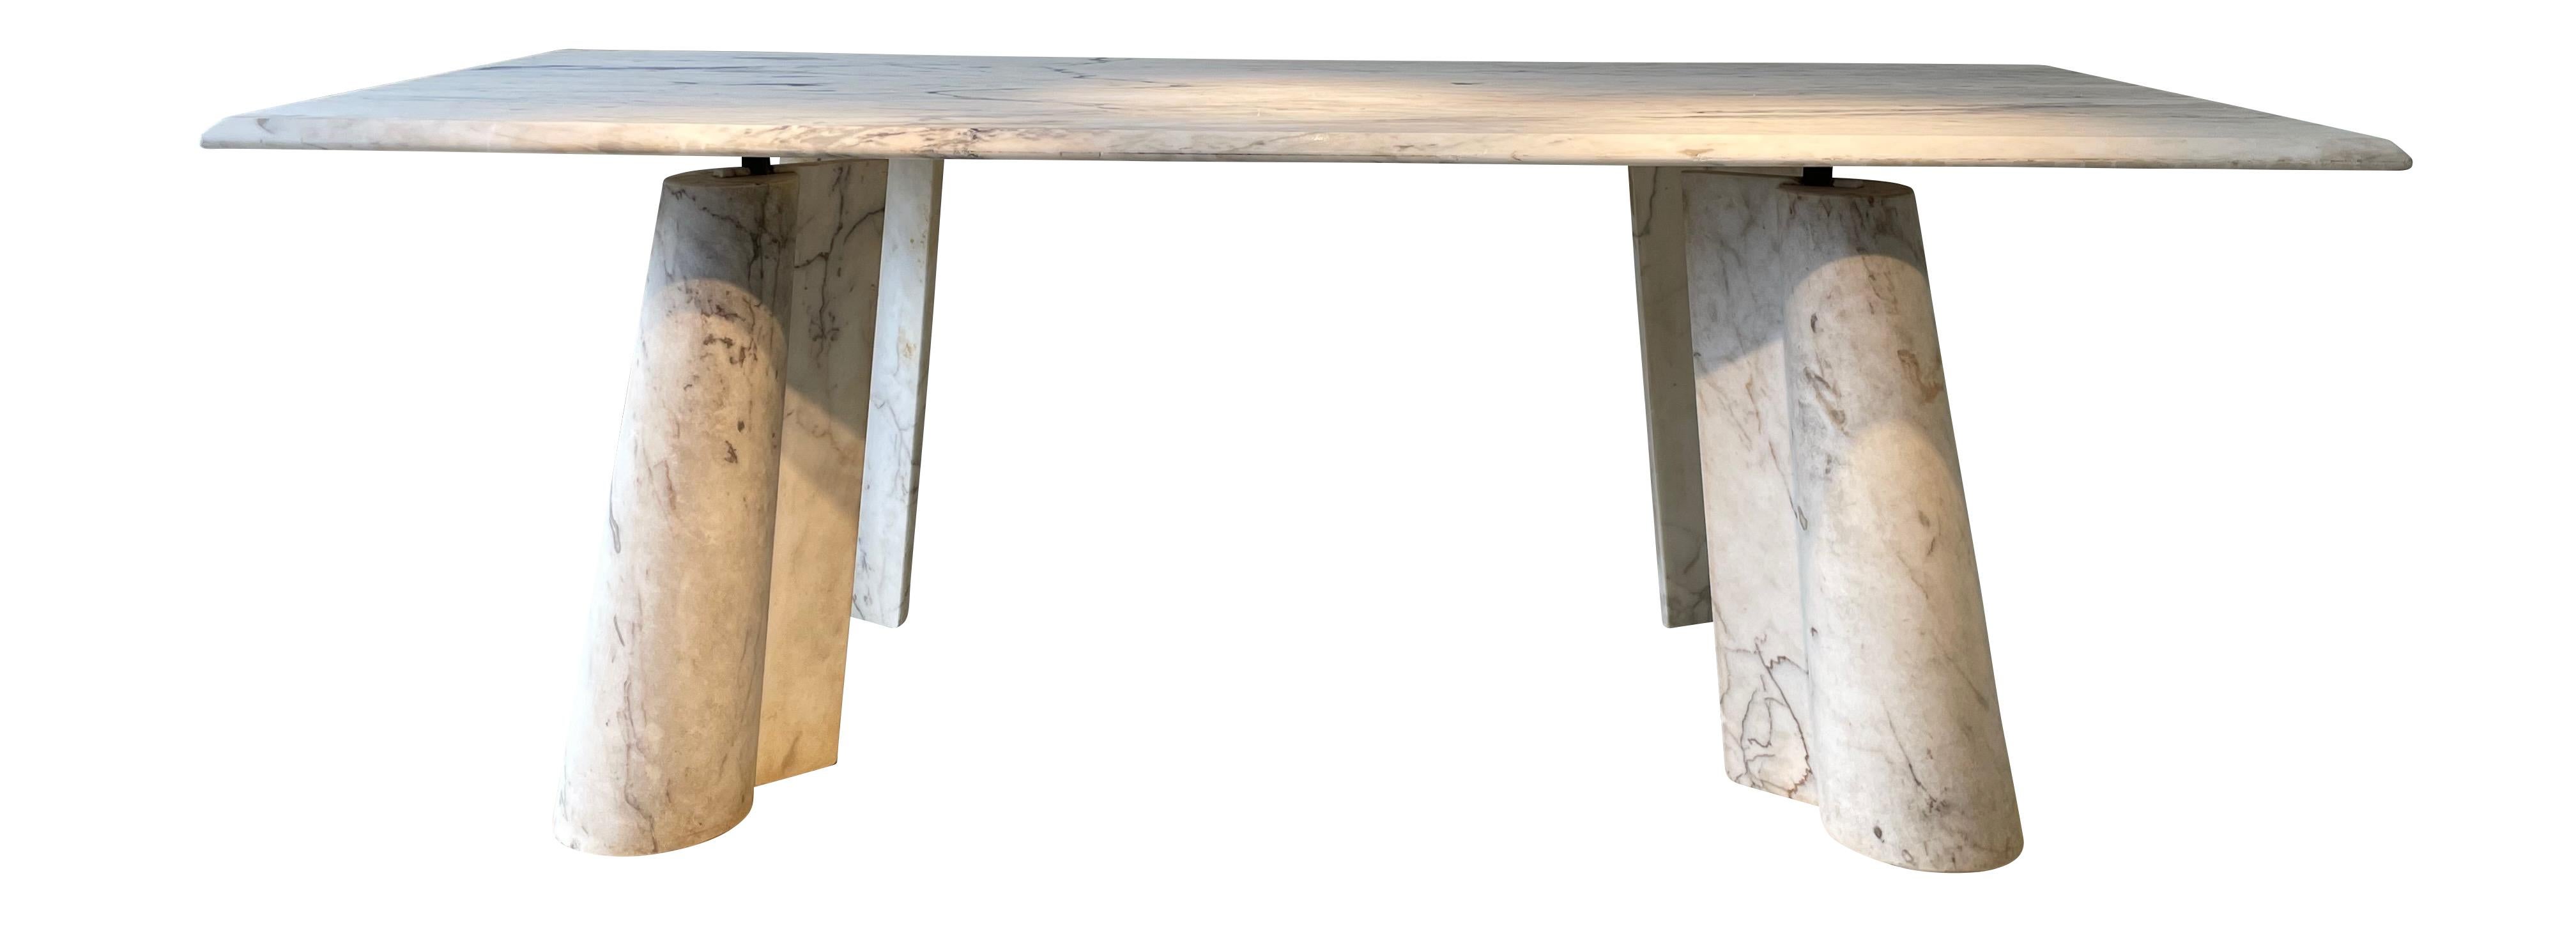 1970's Spanish exceptional all marble center hall table.
Top floats above yet supported by bronze pods that join the splayed marble legs.
Legs are column designed with adjoining rectangles.
Can also be used as a desk or dining table.
